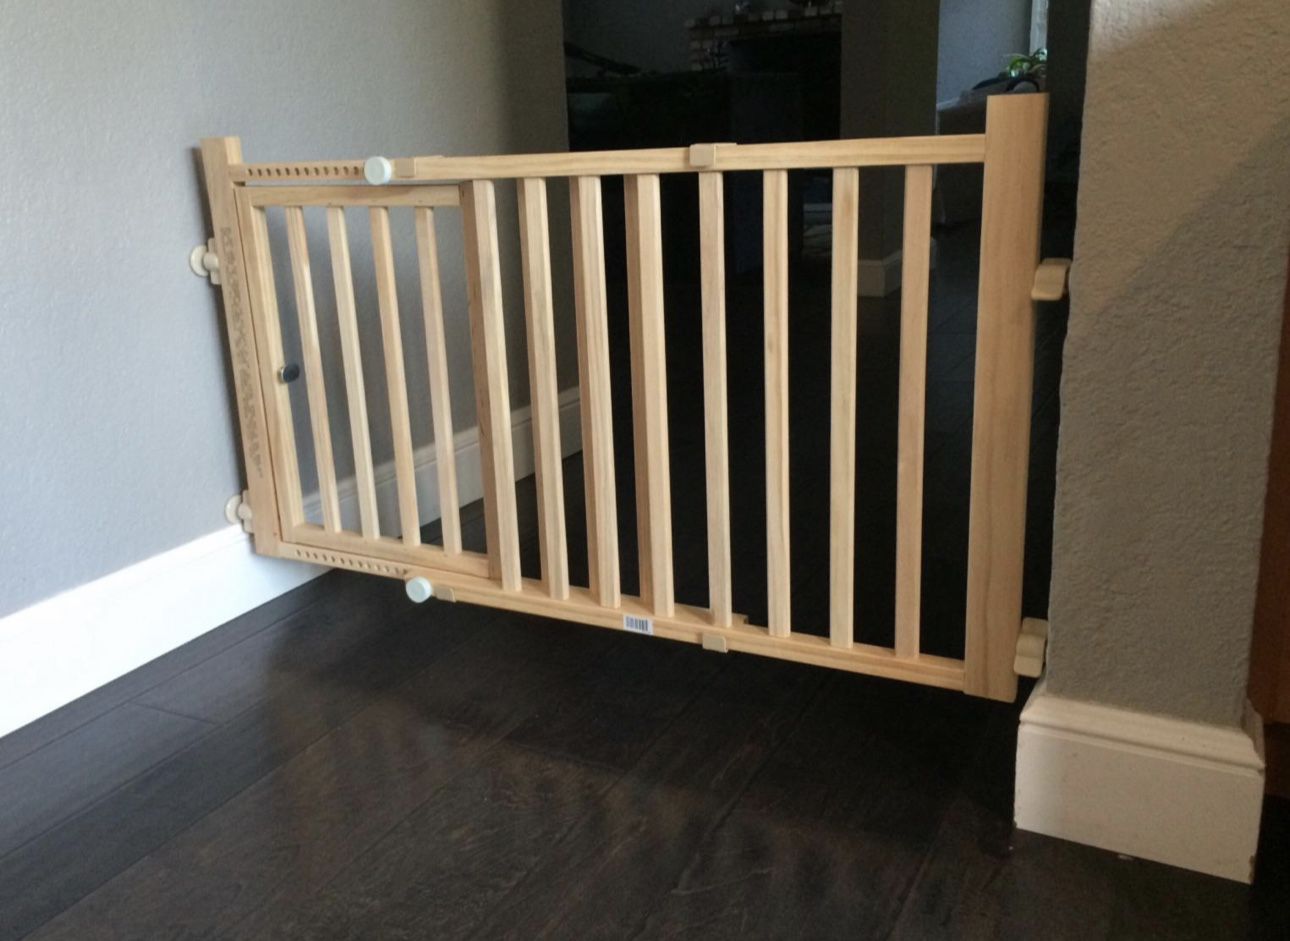 Wooden Dog Gate with Four Legs, 30-40 inches wide by 18 inches high.